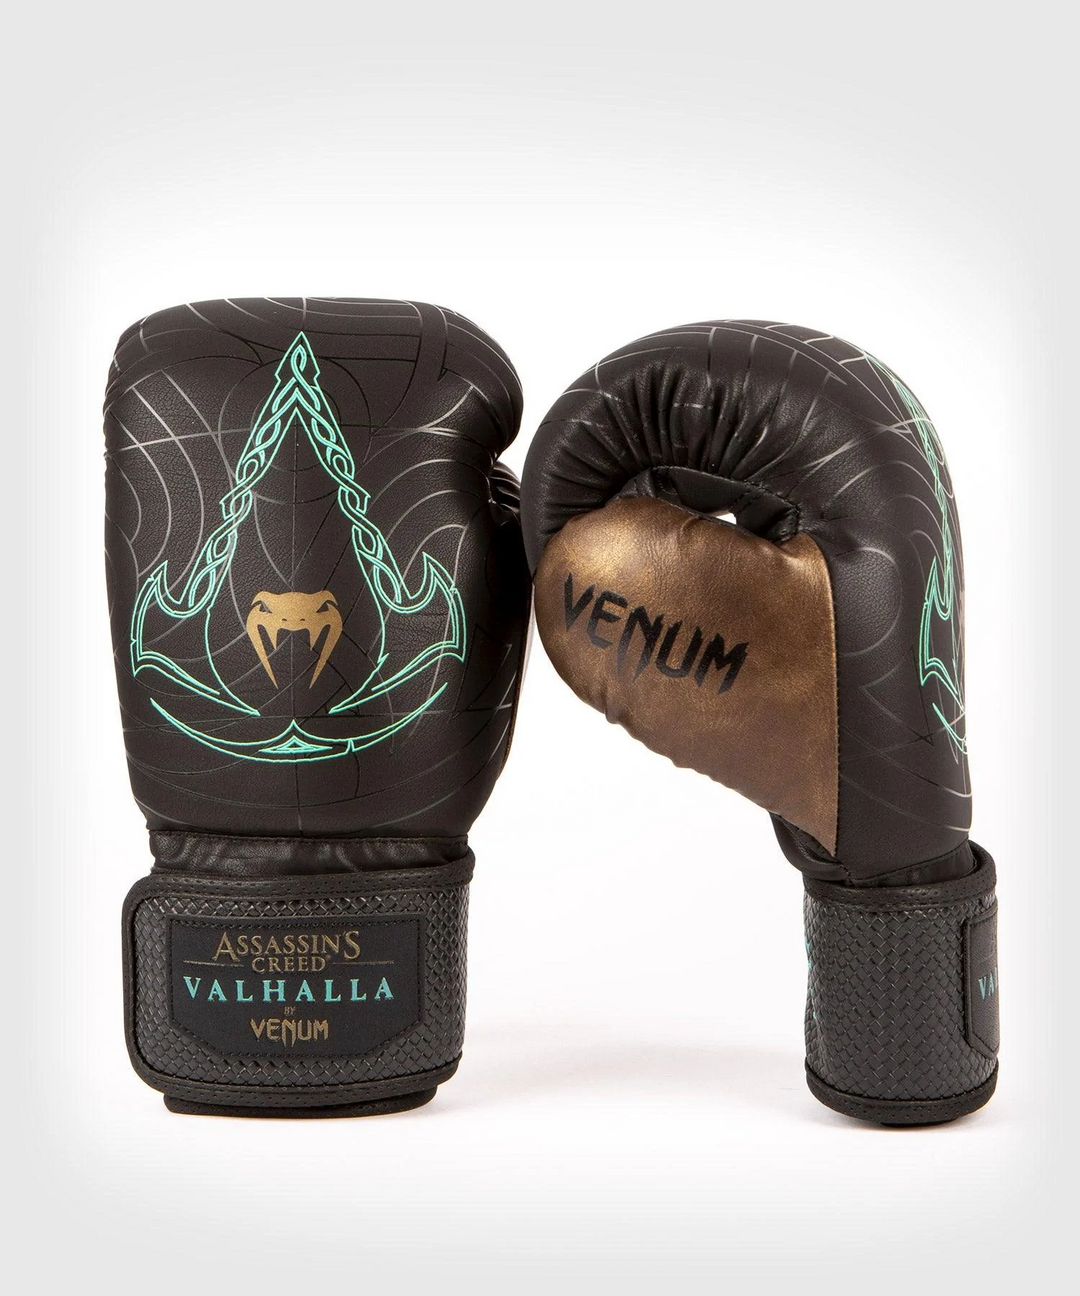 Venum Assassin's Creed Boxing Gloves